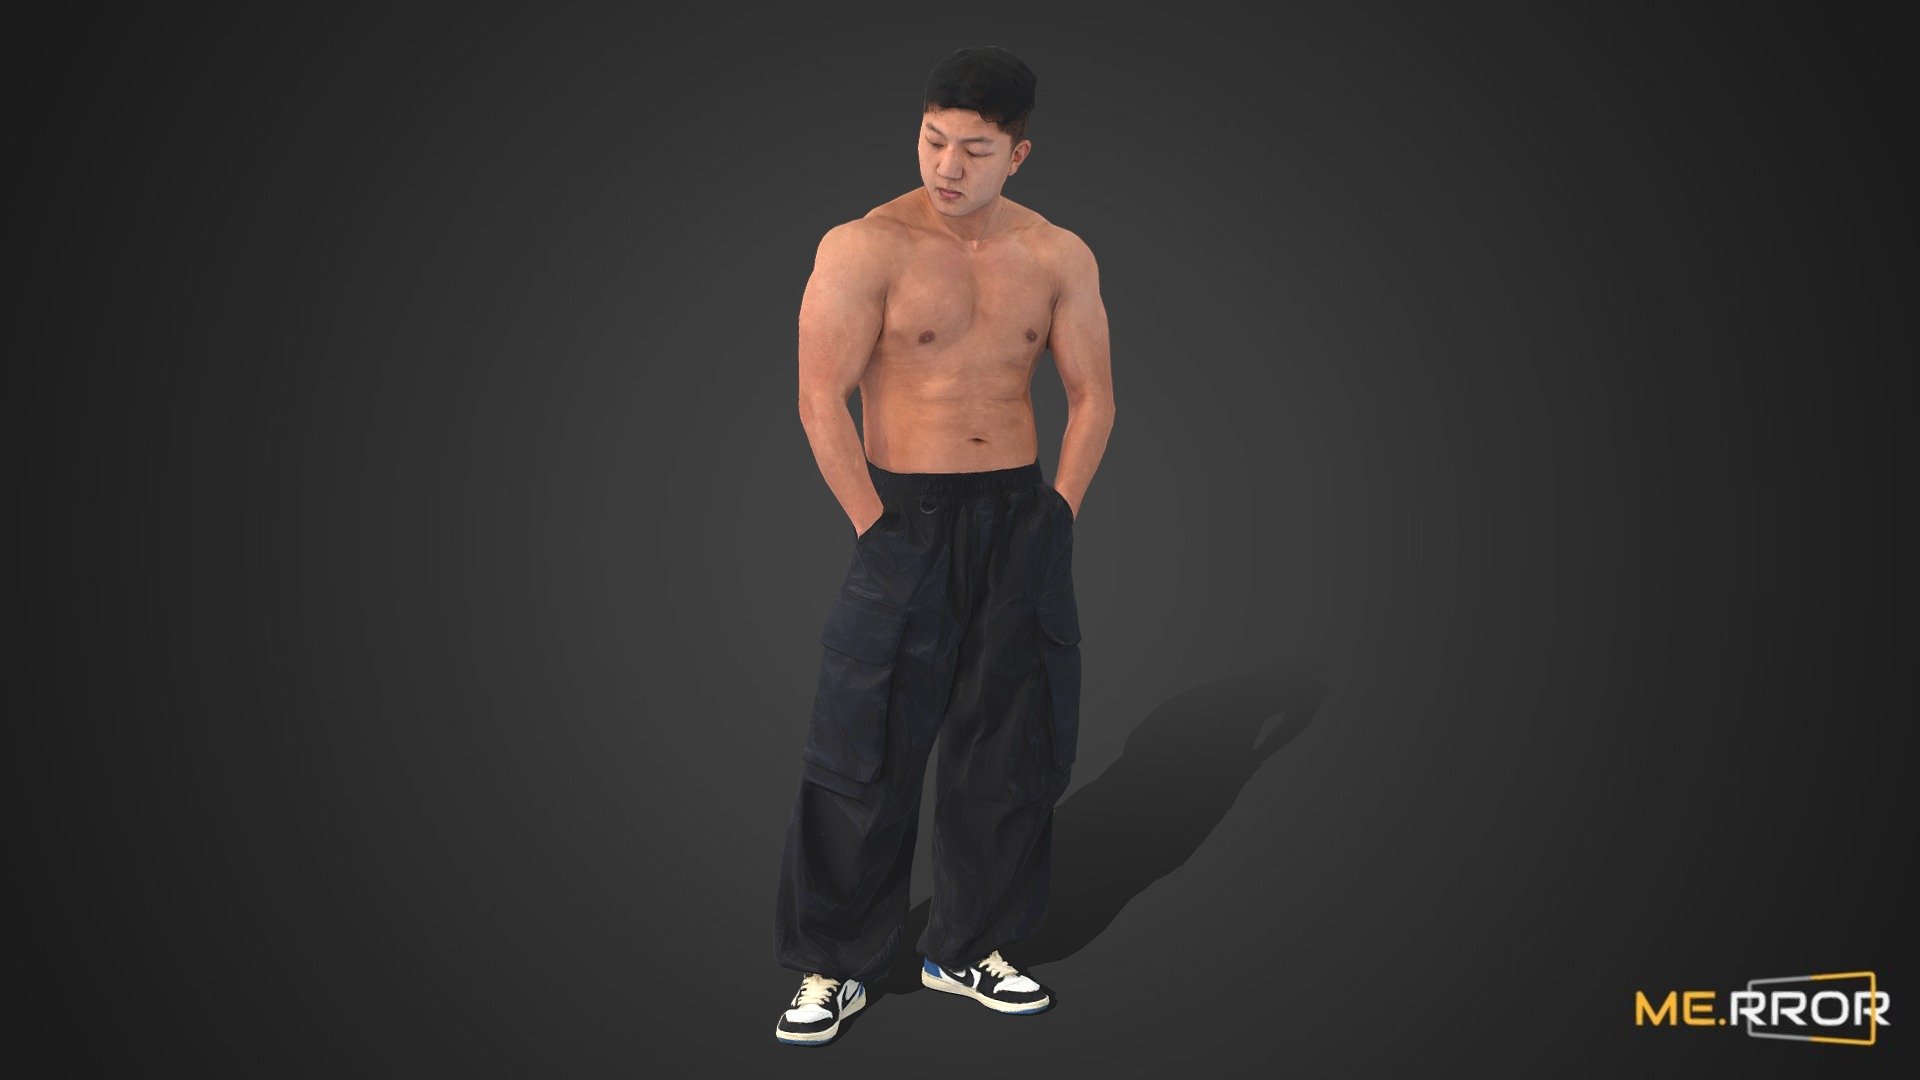 ME.RROR


From 3D models of Asian individuals to a fresh selection of free assets available each month - explore a richer diversity of photorealistic 3D assets at the ME.RROR asset store!

https://me-rror.com/store




[Model Info]




Model Formats : FBX, MAX

Texture Maps (8K) : Diffuse

You can buy this model at https://me-rror.com/asset/human/asset610




Find Scanned - 2M poly version here: https://sketchfab.com/3d-models/0ff7271913f644a59250fb58fac8d904

Find the topologized version here : https://sketchfab.com/3d-models/232a8d7ca827439c98a1c4a592c7b973

If you encounter any problems using this model, please feel free to contact us. We'd be glad to help you.



[About ME.RROR]

Step into the future with ME.RROR, South Korea's leading 3D specialist. Bespoke creations are not just possible; they are our specialty.

Service areas:




3D scanning

3D modeling

Virtual human creation

Inquiries: https://merror.channel.io/lounge - Asian Man Scan_Posed 30k poly - 3D model by ME.RROR Studio (@merror) 3d model